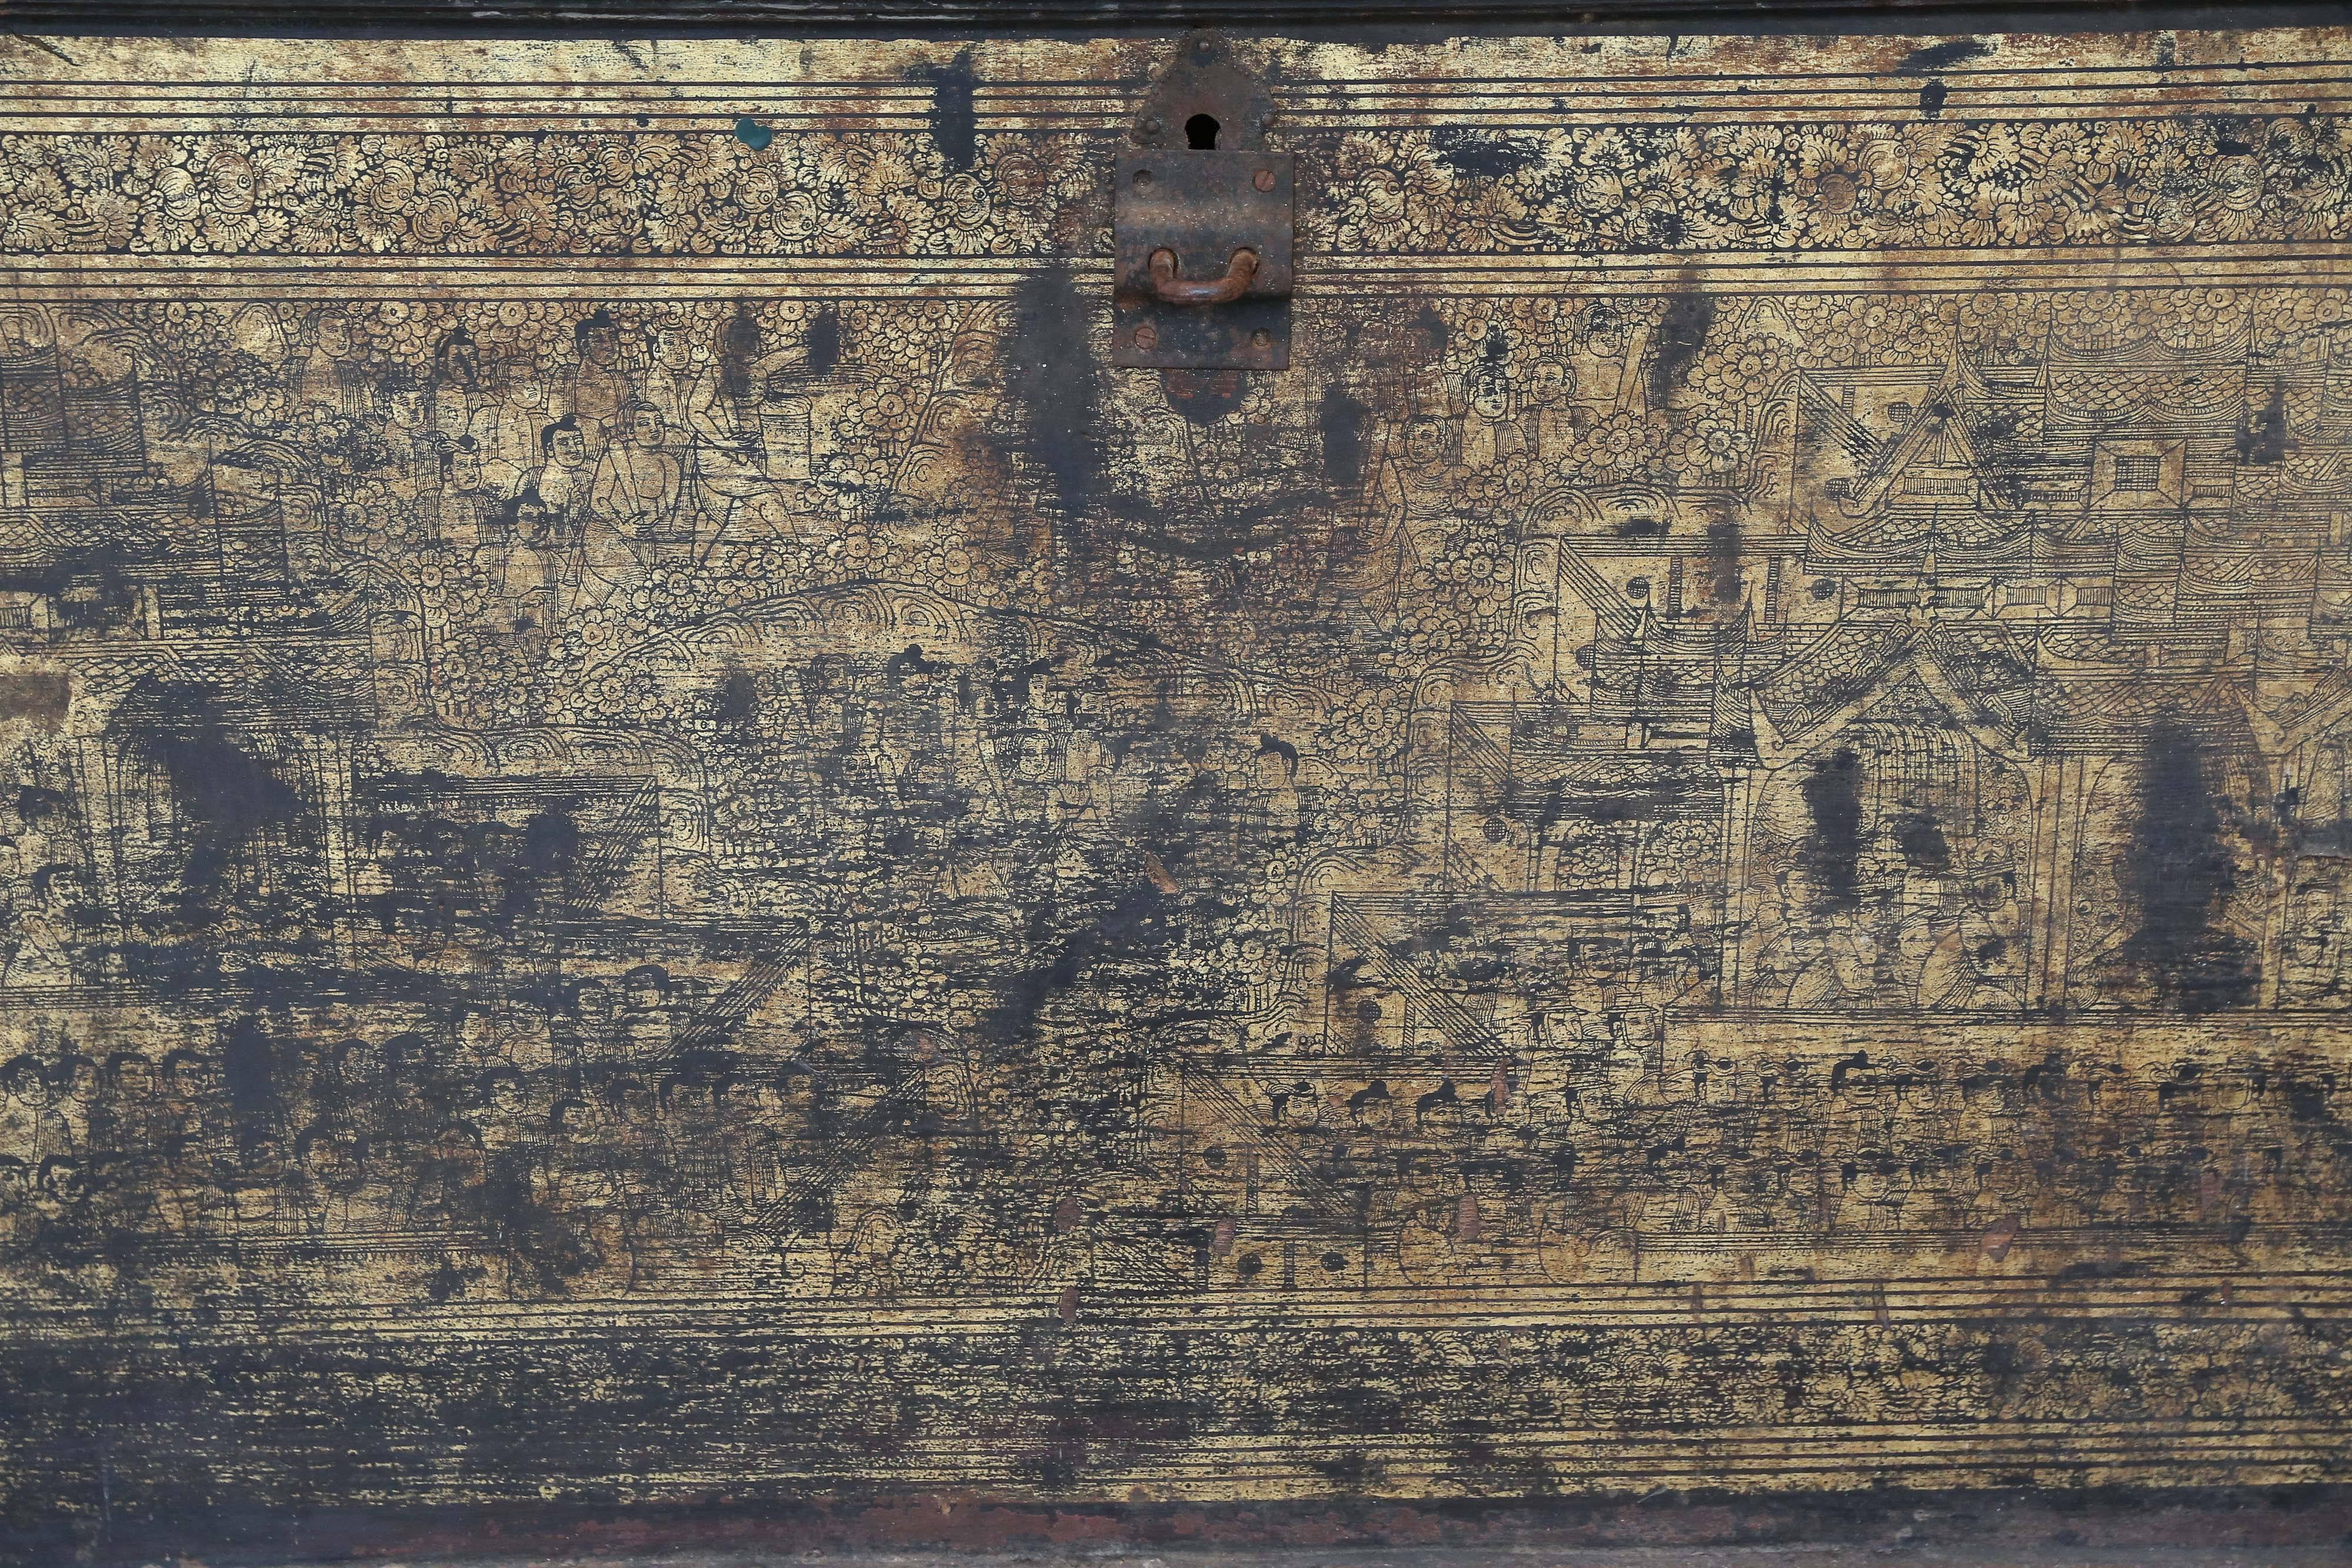 A true treasure uncovered in Southeast Asia, this trunk dates back 200 years and is originally from Burma (modern day Myanmar). Exquisitely parcel gilt and hand-painted in gold with images from Burmese Buddhist culture.

Dimensions: 25 in. Height